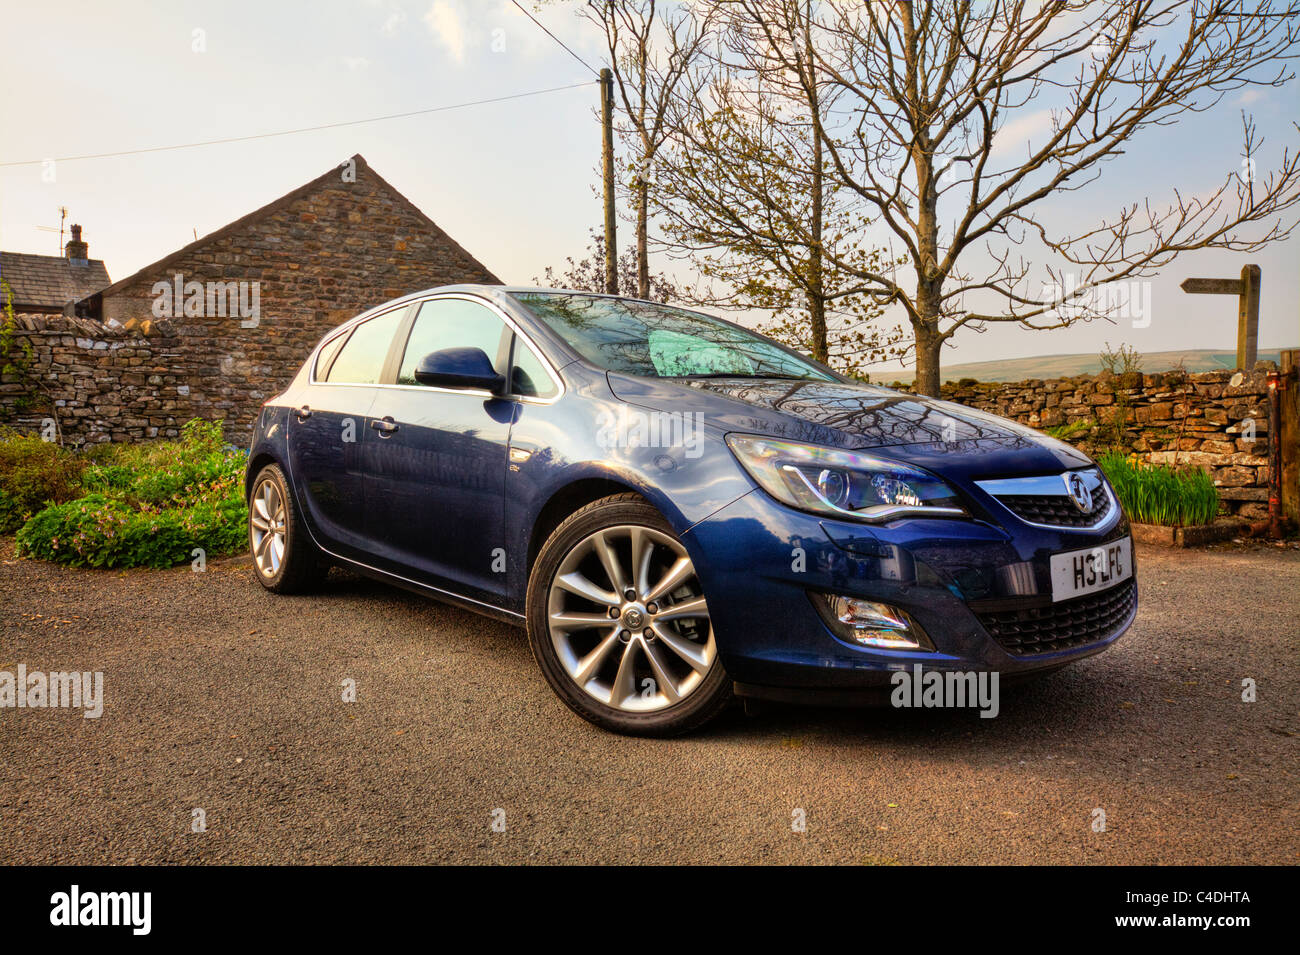 New Vauxhall Astra Diesel parked waiting journey angle to show side and front hdr image yorkshire drystone wall background Stock Photo